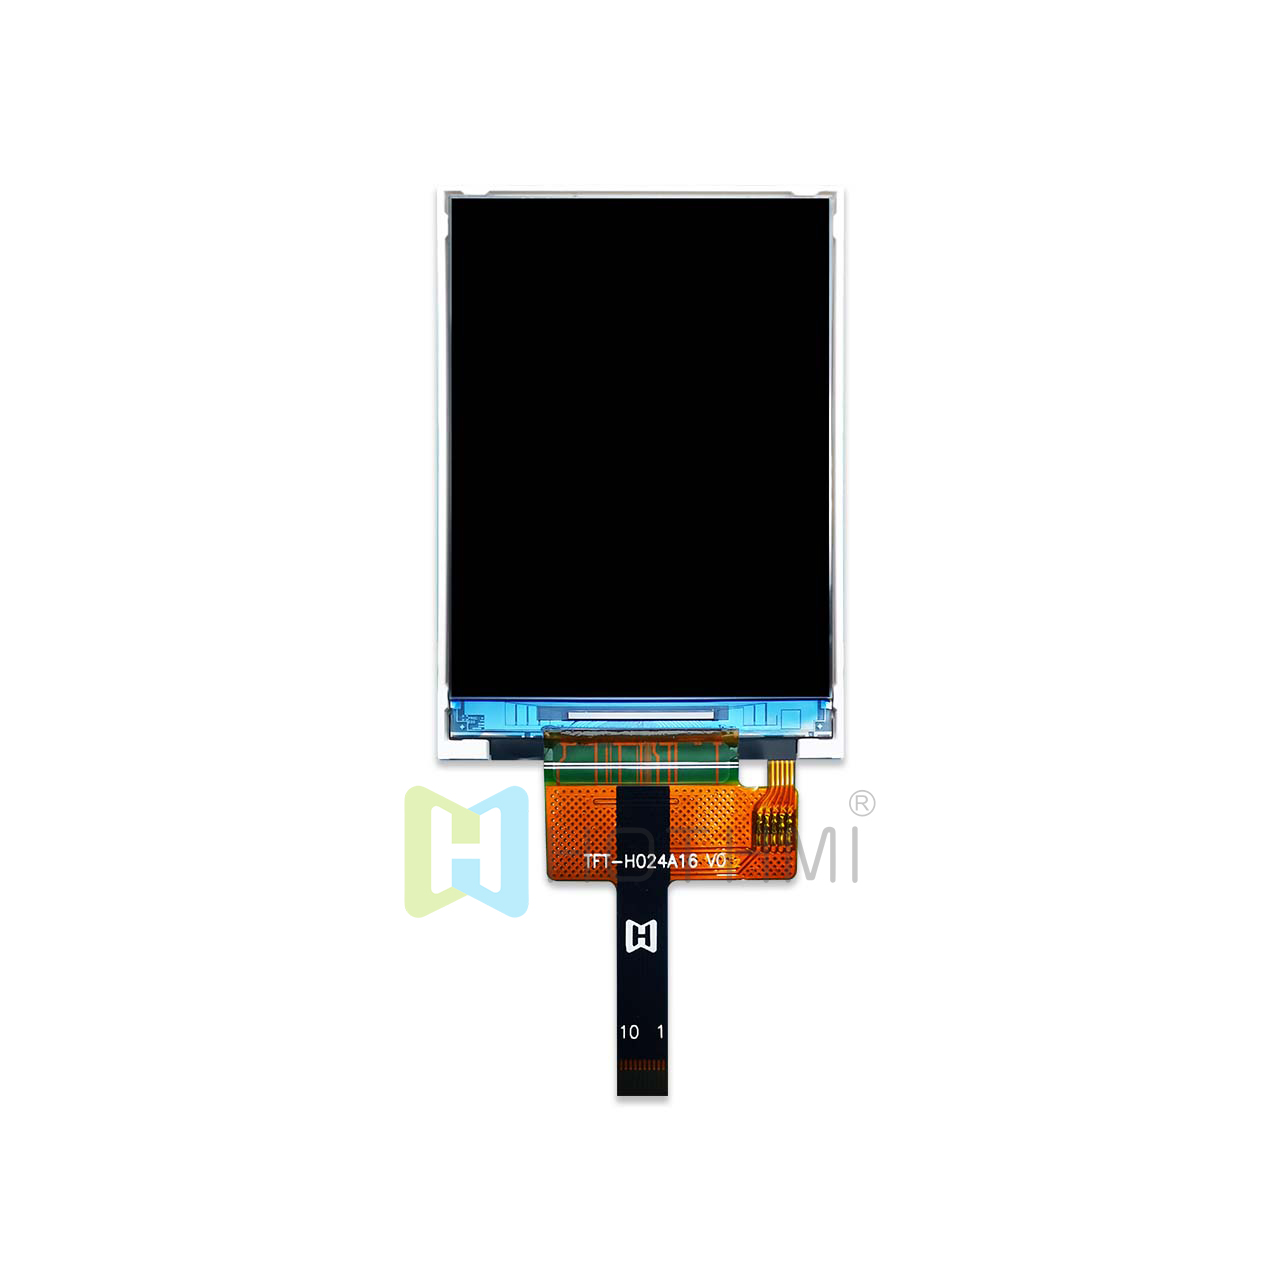 2.4 inch TFT IPS full viewing angle color LCD module 240x320 pixels ST7789 4-wire serial port SPI Arduino